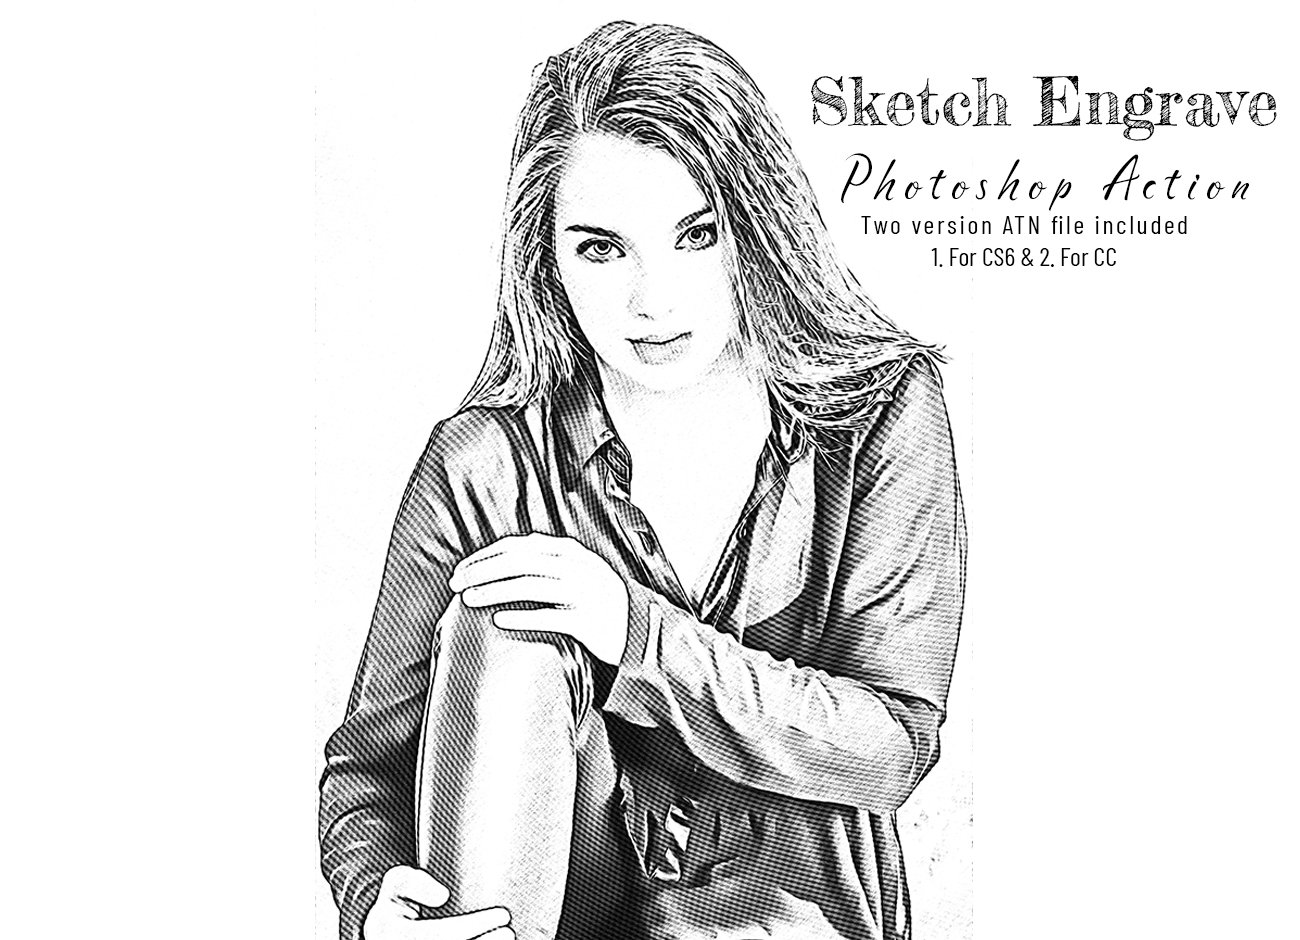 Sketch Engrave Photoshop Actioncover image.